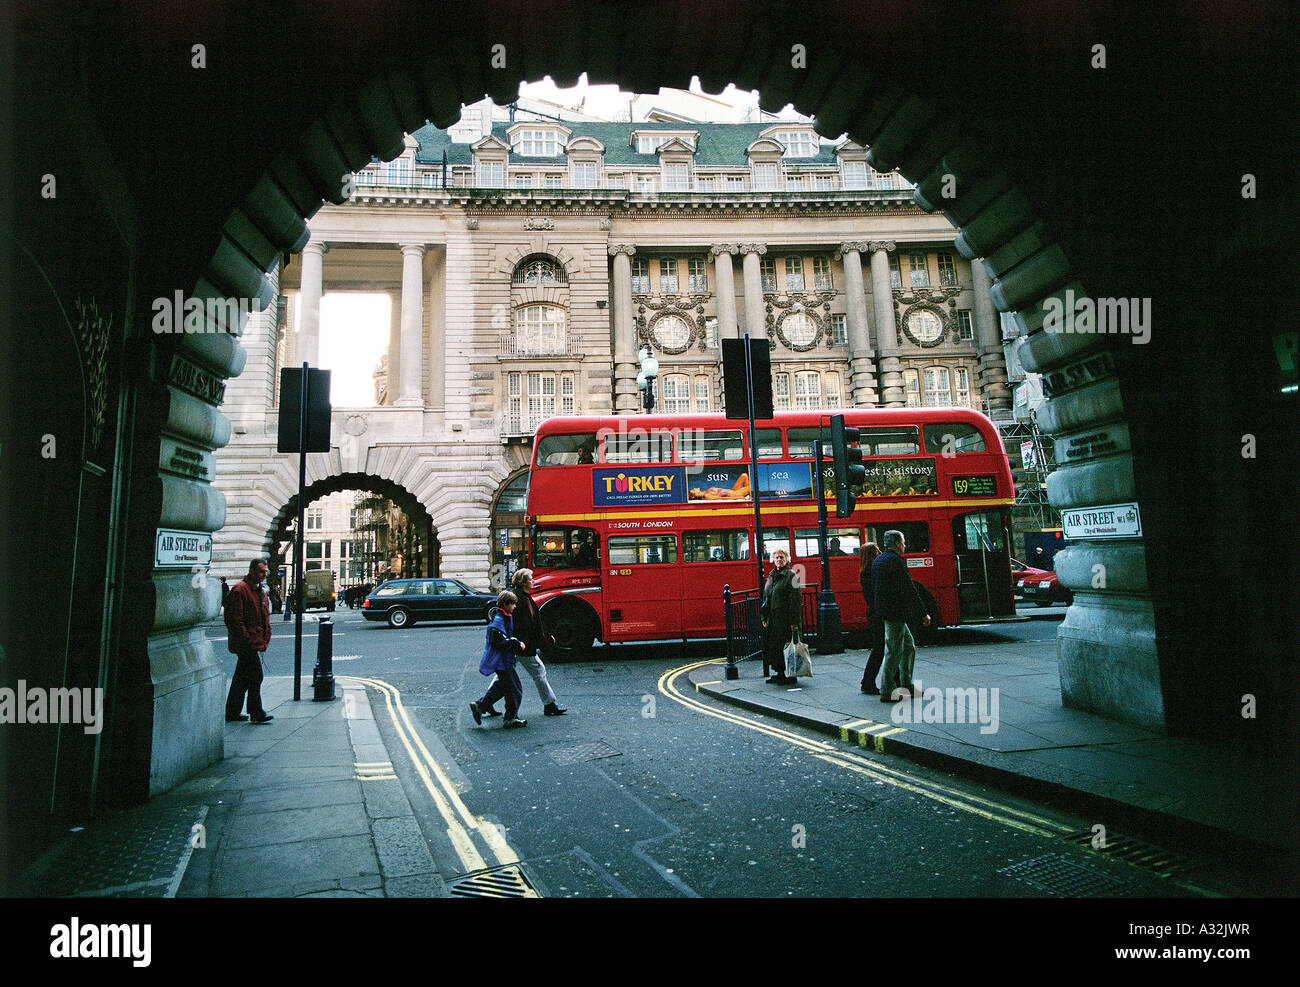 London bus rouge, Air Street, Piccadilly, Londres, Royaume-Uni Banque D'Images